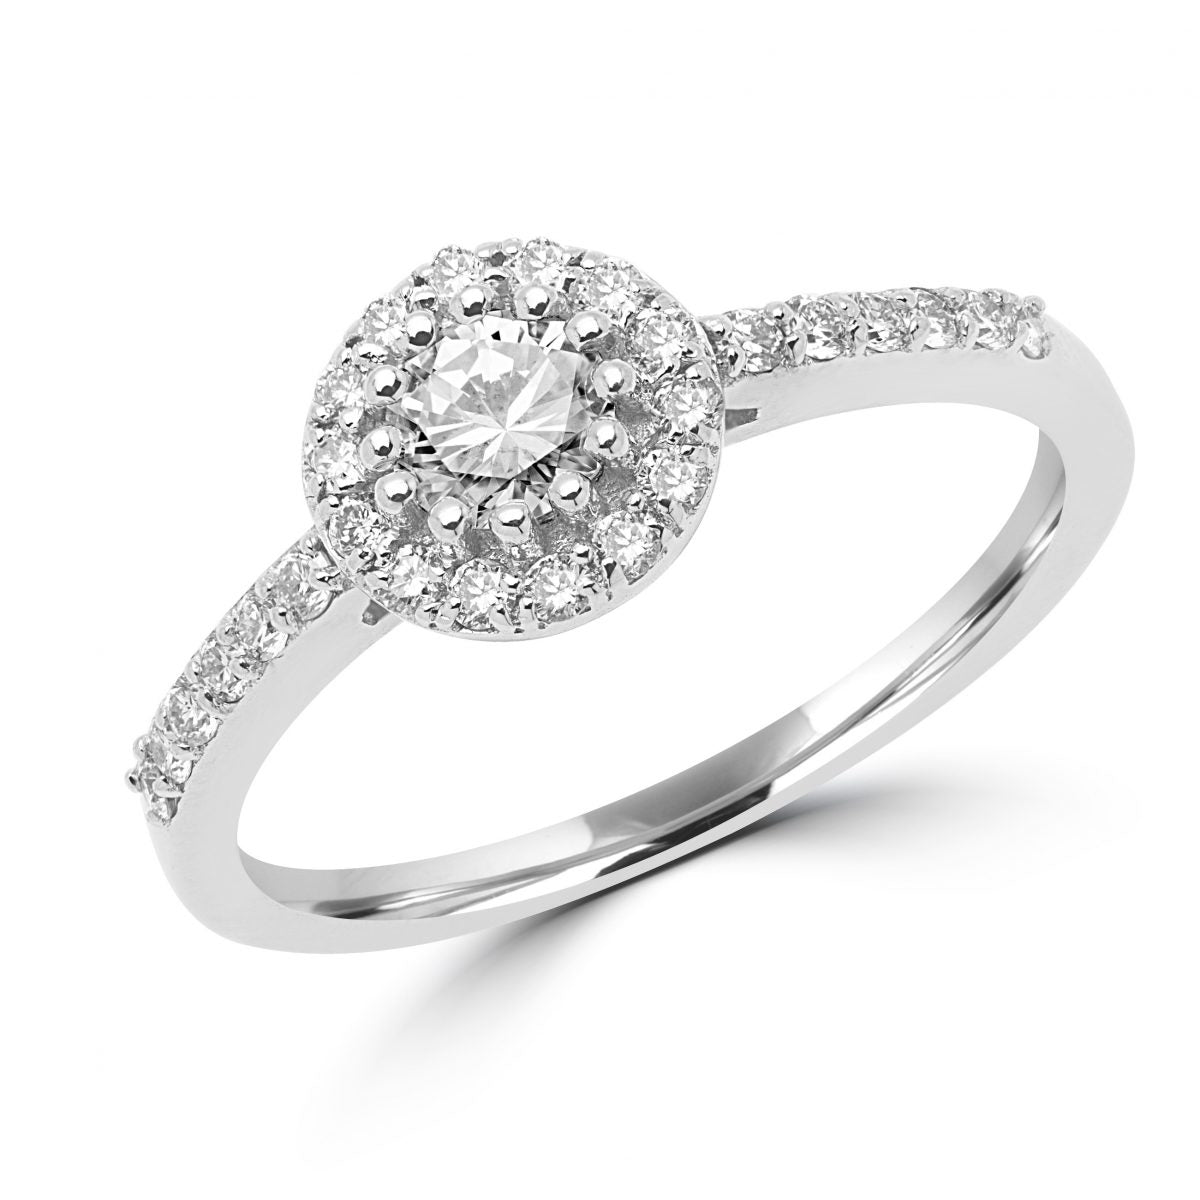 Engagement halo diamond ring 0.54 (ctw) 14k in white gold